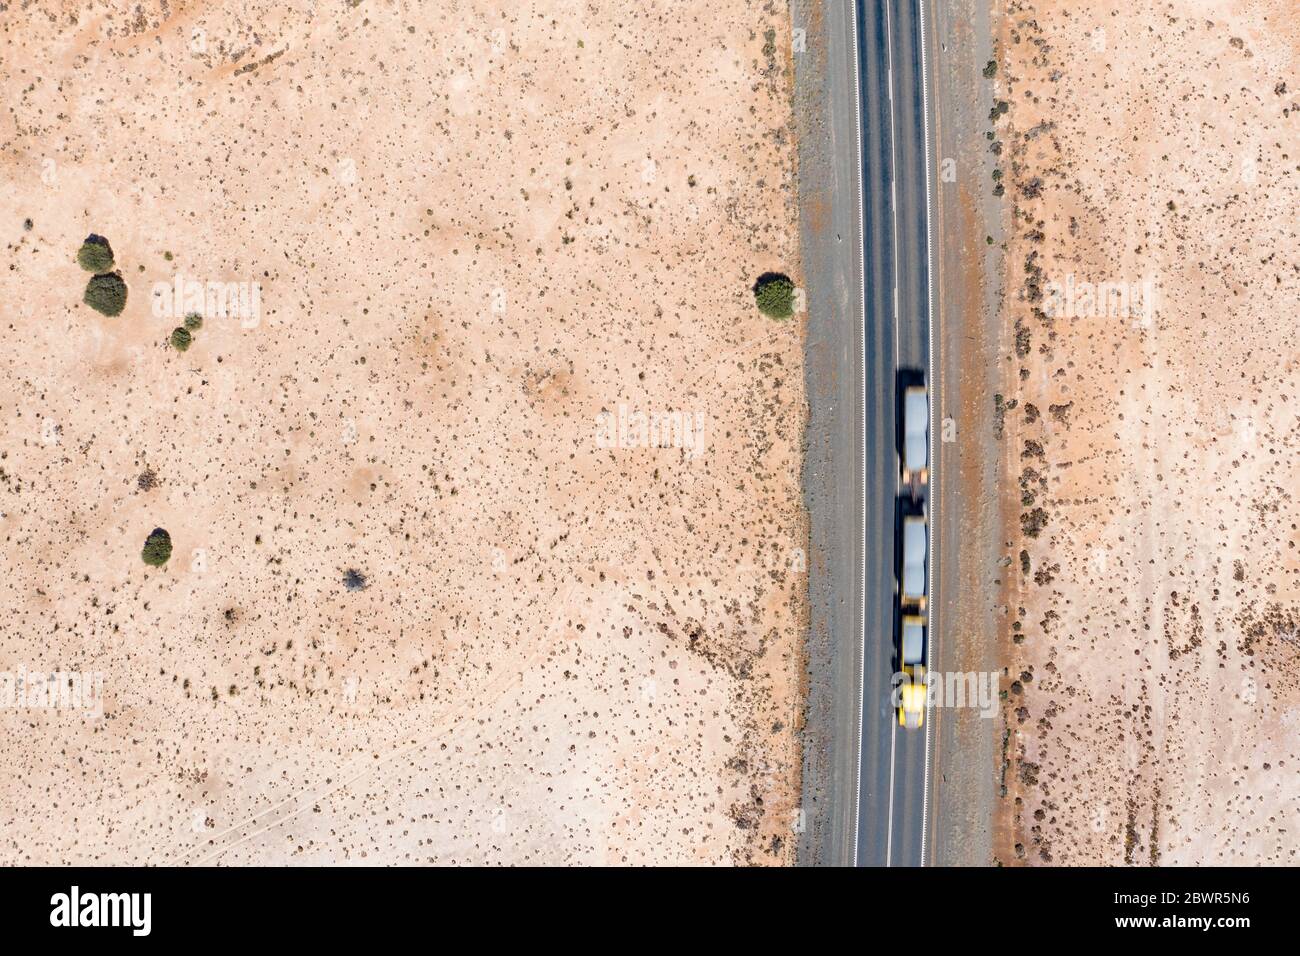 Aerial views of the road over the dry pink lake on the Coolgardie-Esperance highyway just north of Norseman in Western Australia Stock Photo